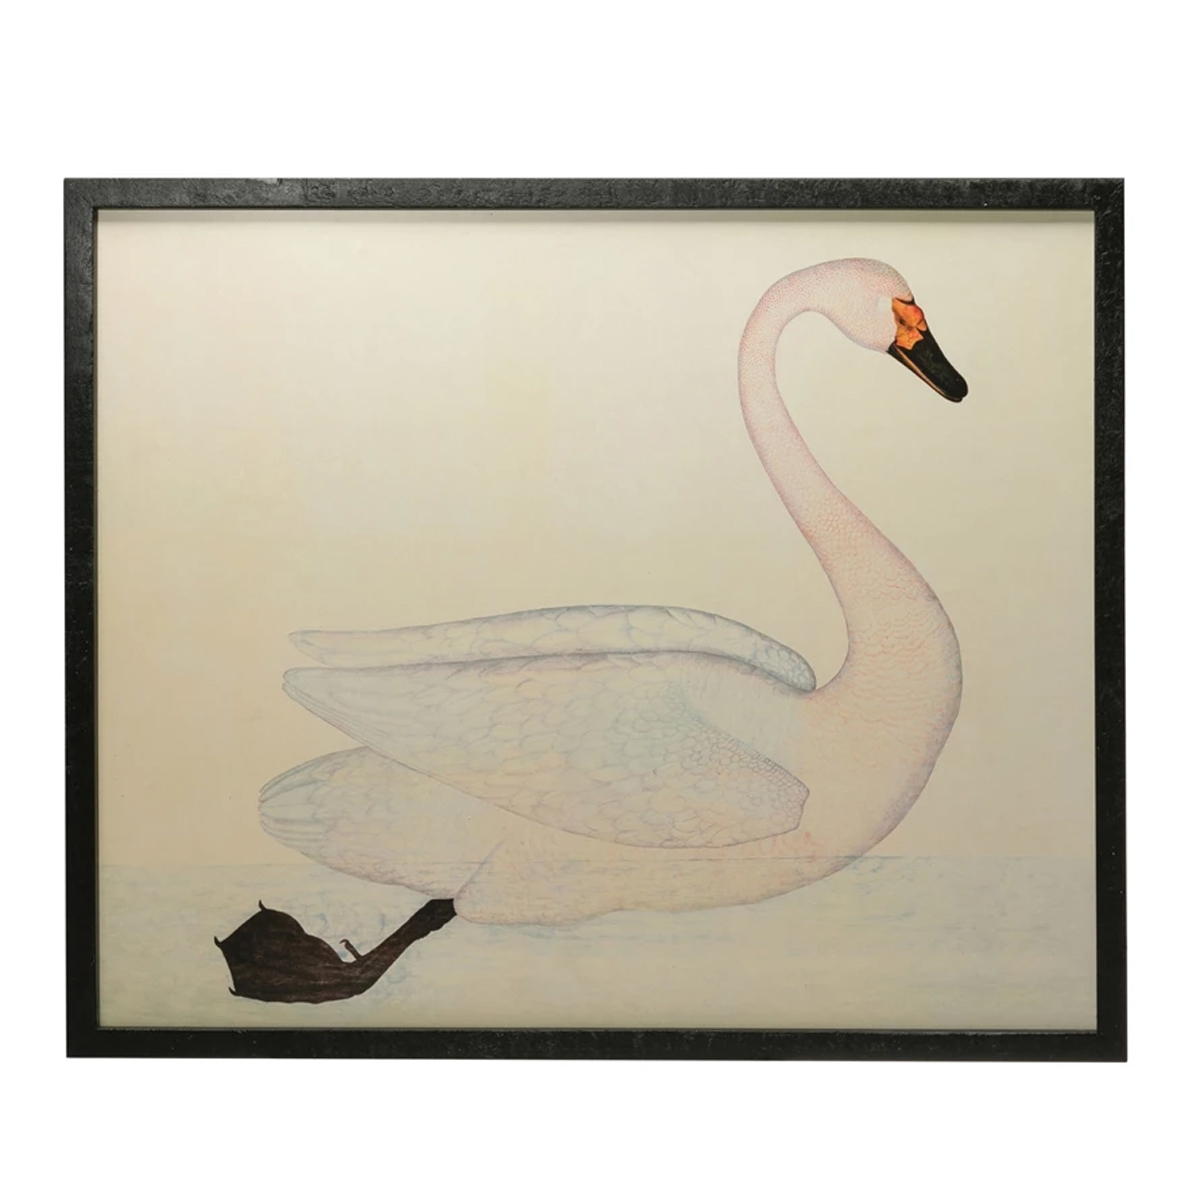 Picture of WALL DECOR W/VINTAGE SWAN WHT